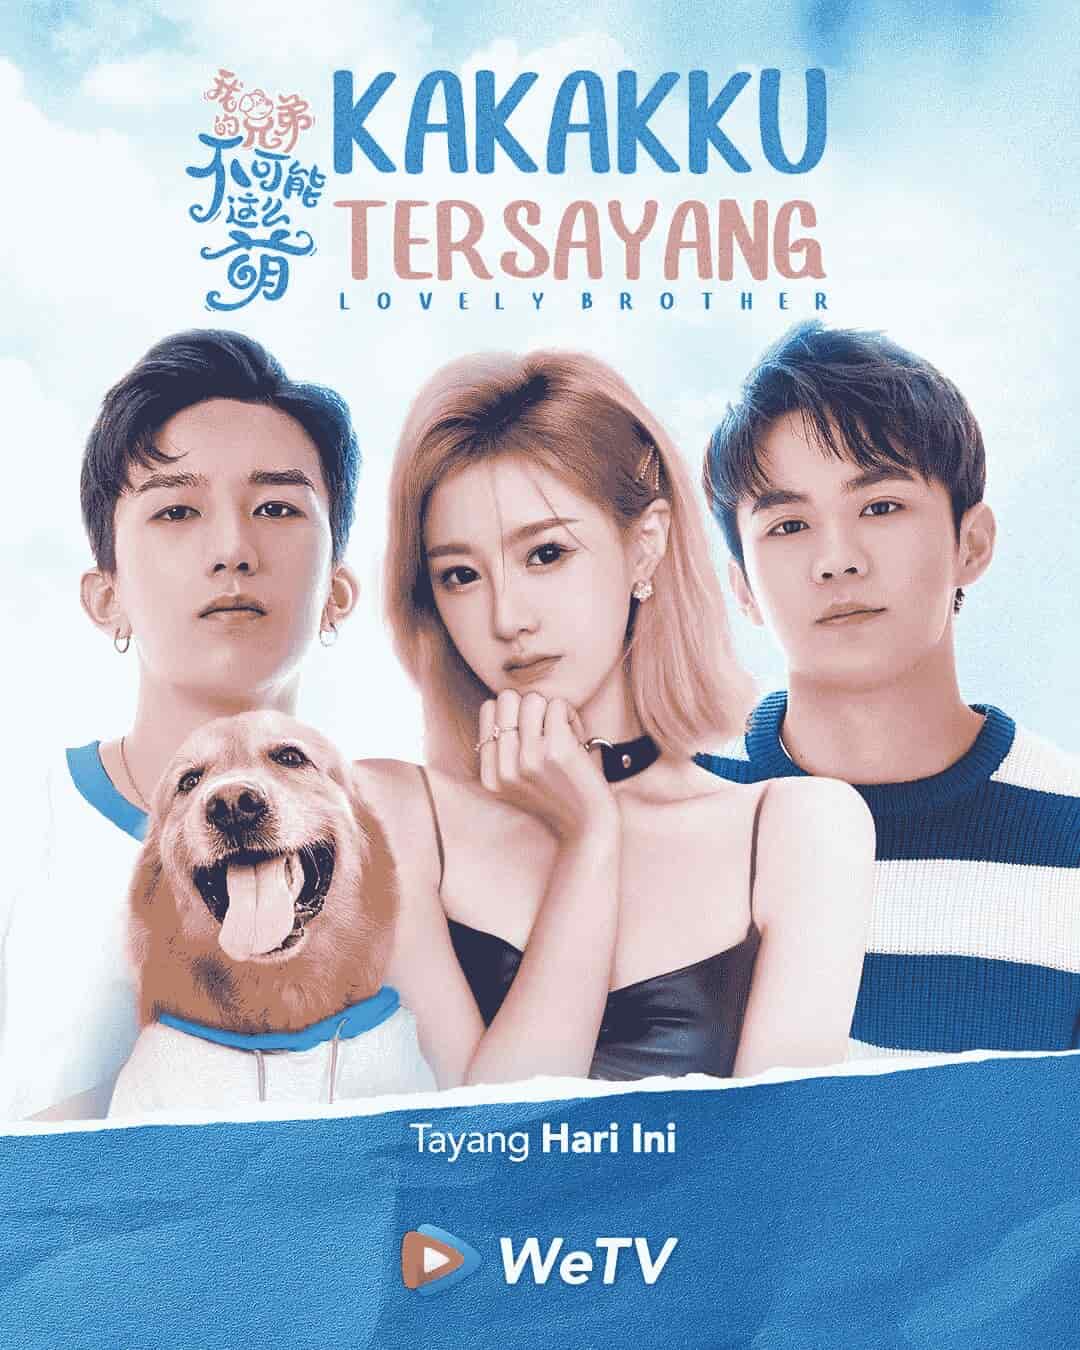 Lovely Brother - Sinopsis, Pemain, OST, Episode, Review